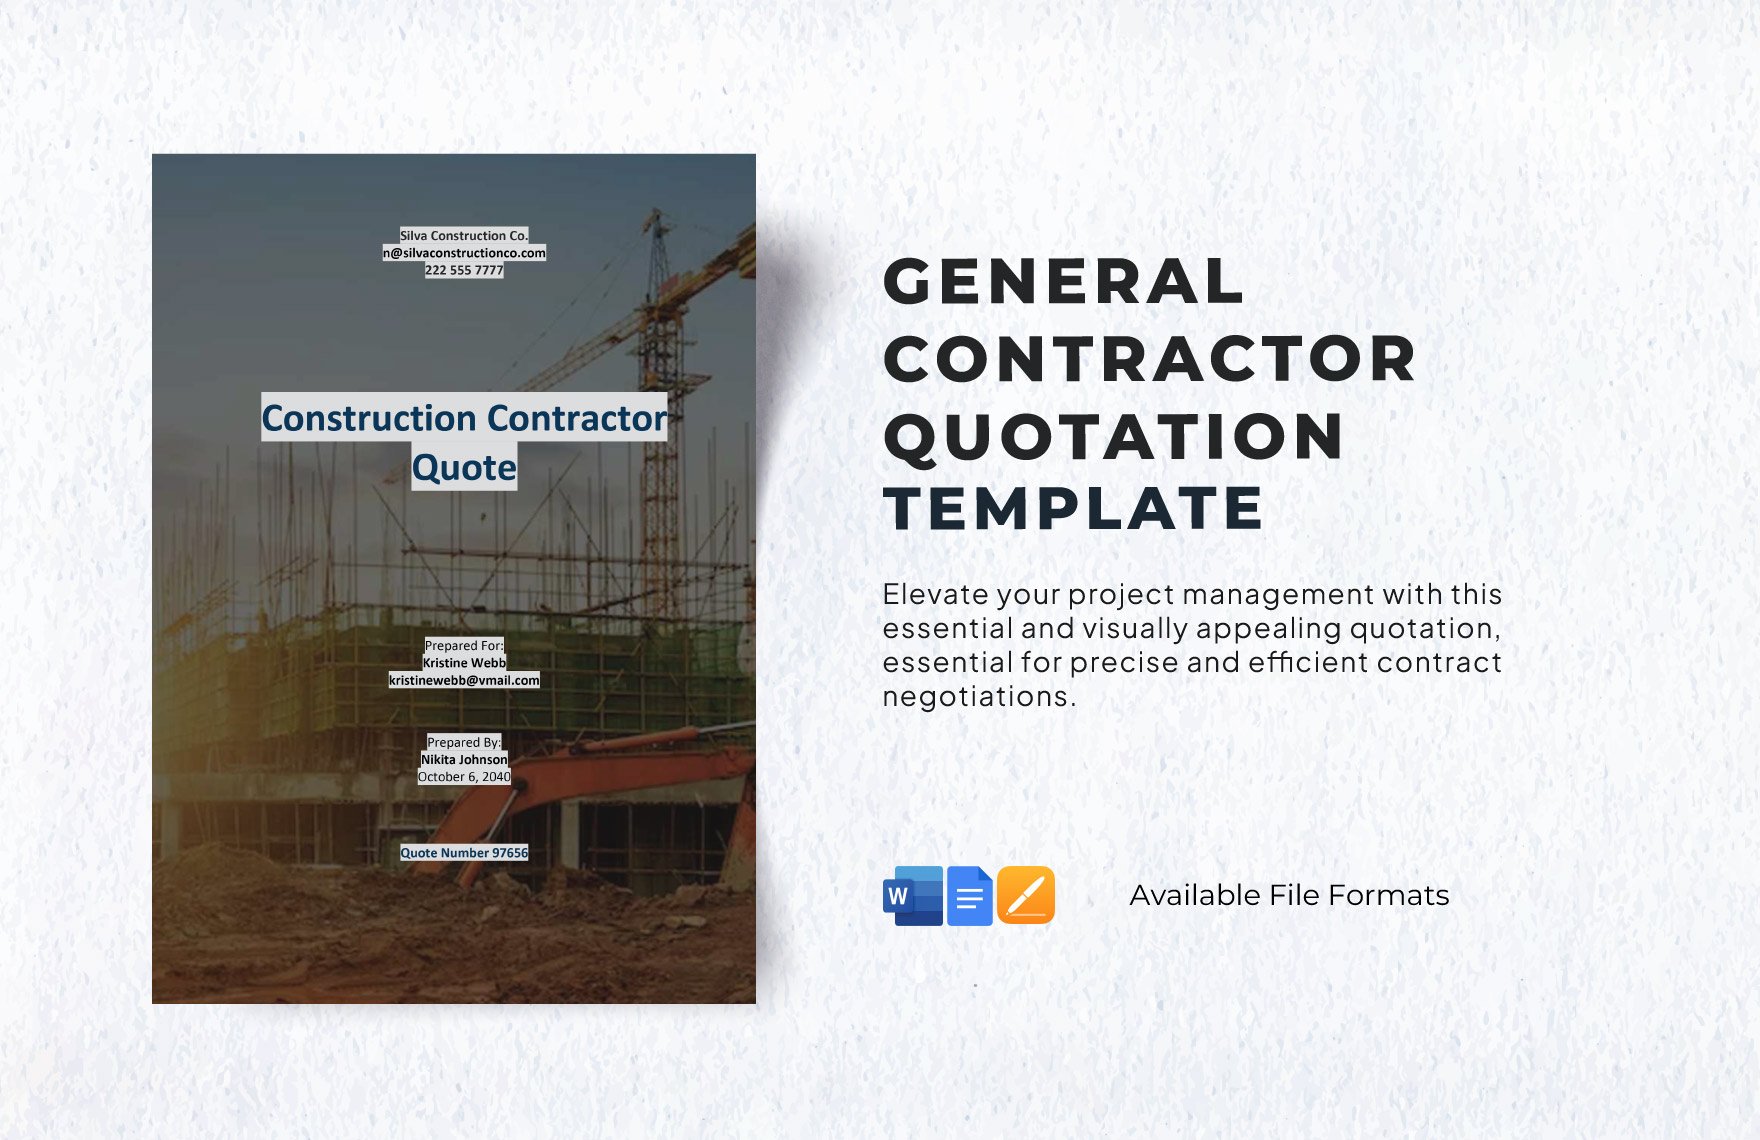 General Contractor Quotation Template